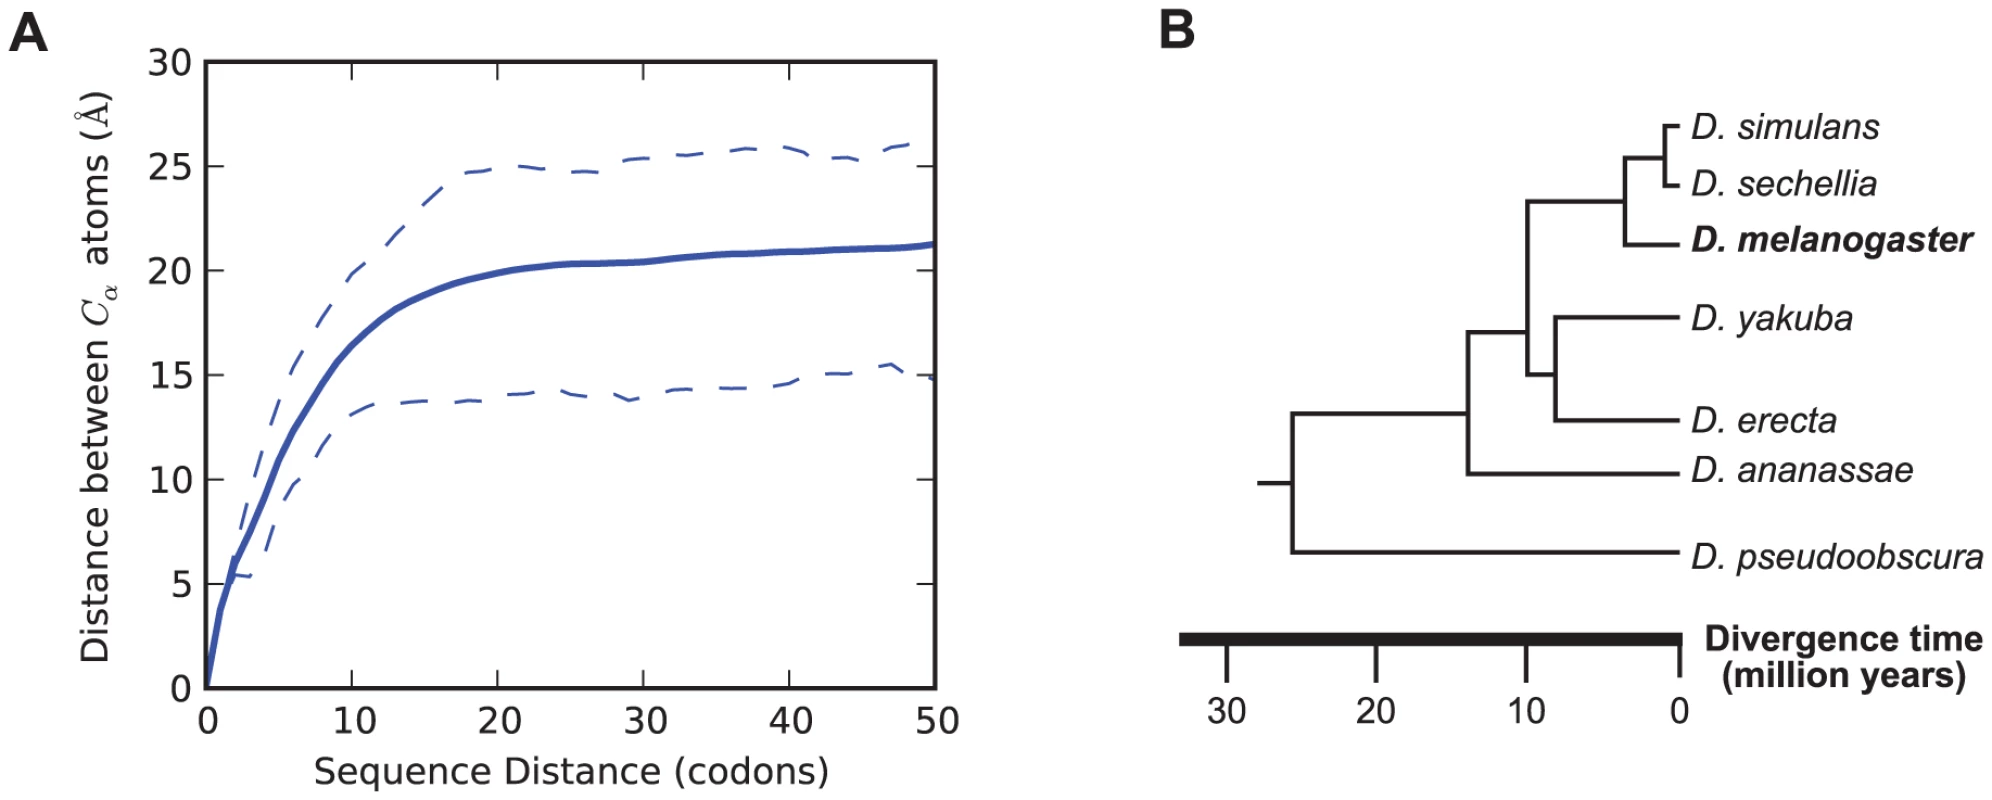 Structural distance as a function of sequence distance and Drosophilid phylogeny.